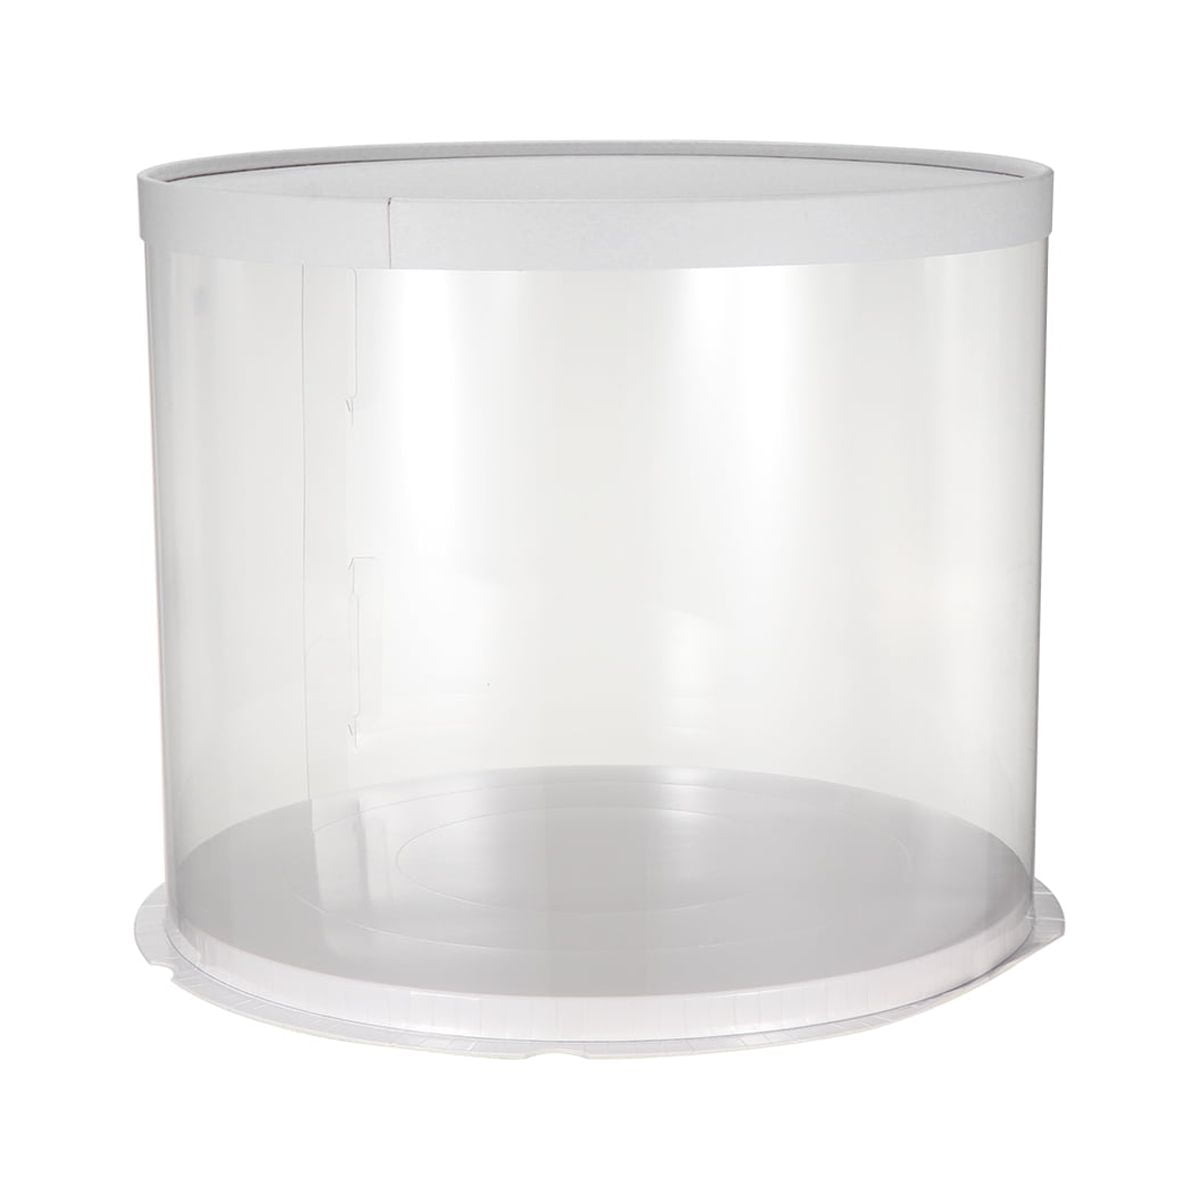 Plastic Transparent Cake Box Round Cake Packaging Boxes Organizer for ...